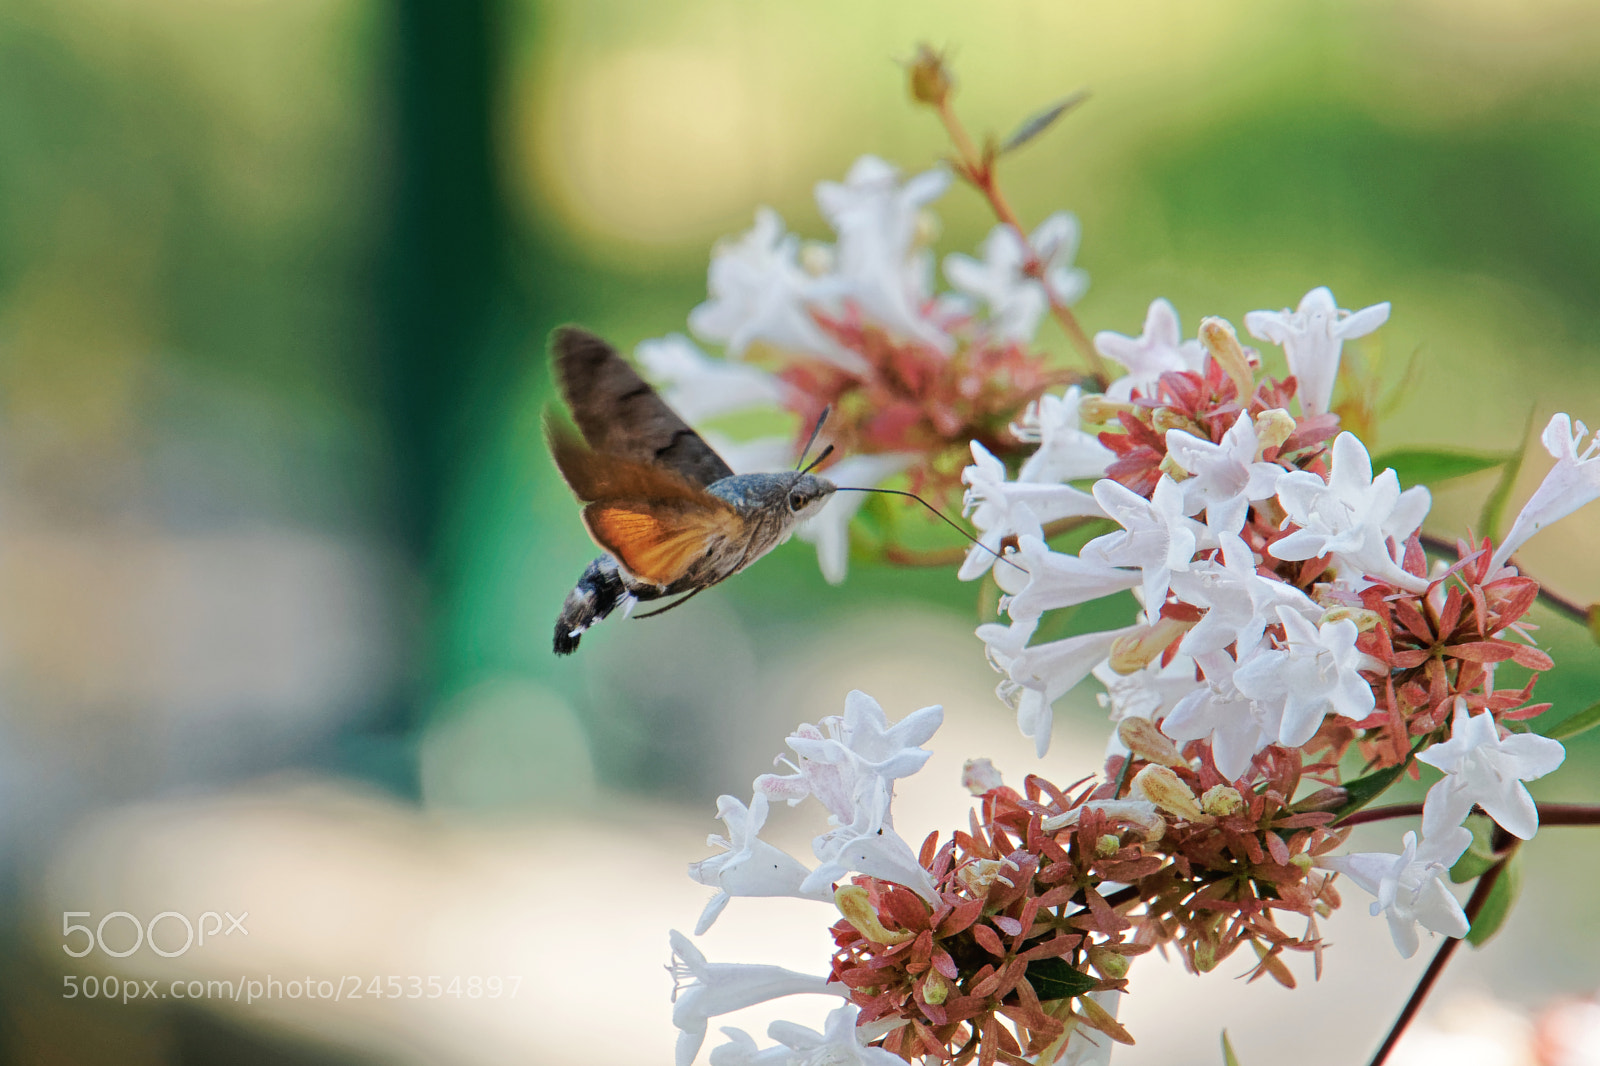 Sony a6000 sample photo. Hummingbird hawkmoth freezed in photography